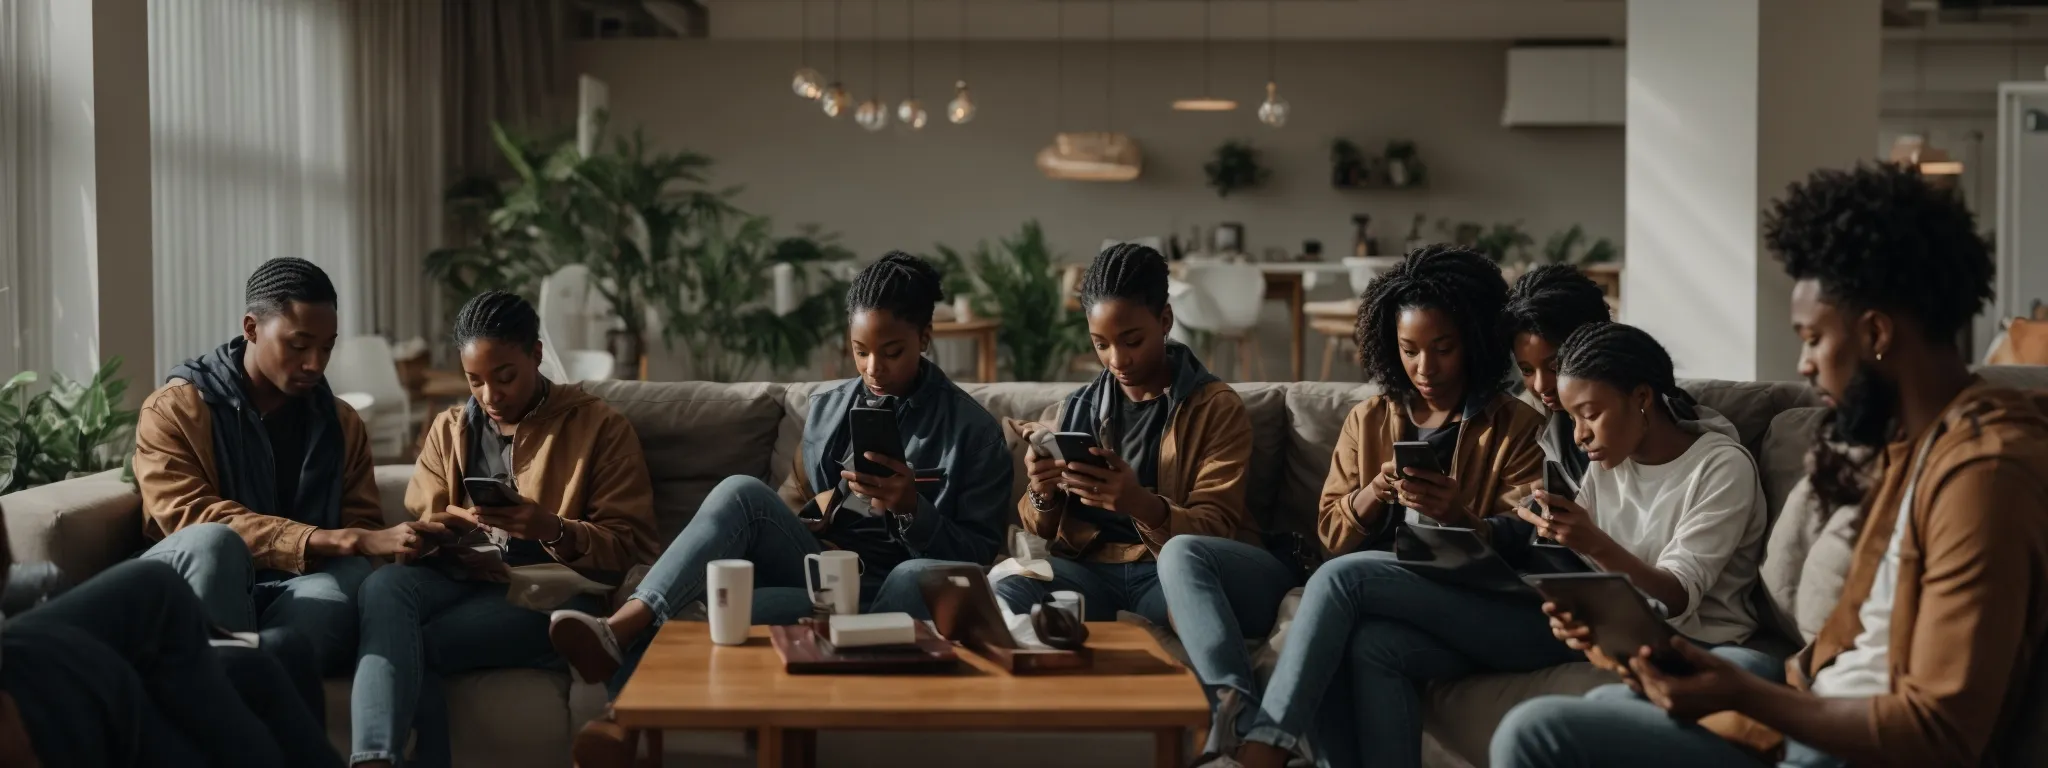 a group of diverse individuals engrossed in their smartphones and tablets, gathered in an airy, modern lounge, symbolizing active engagement on social media platforms.